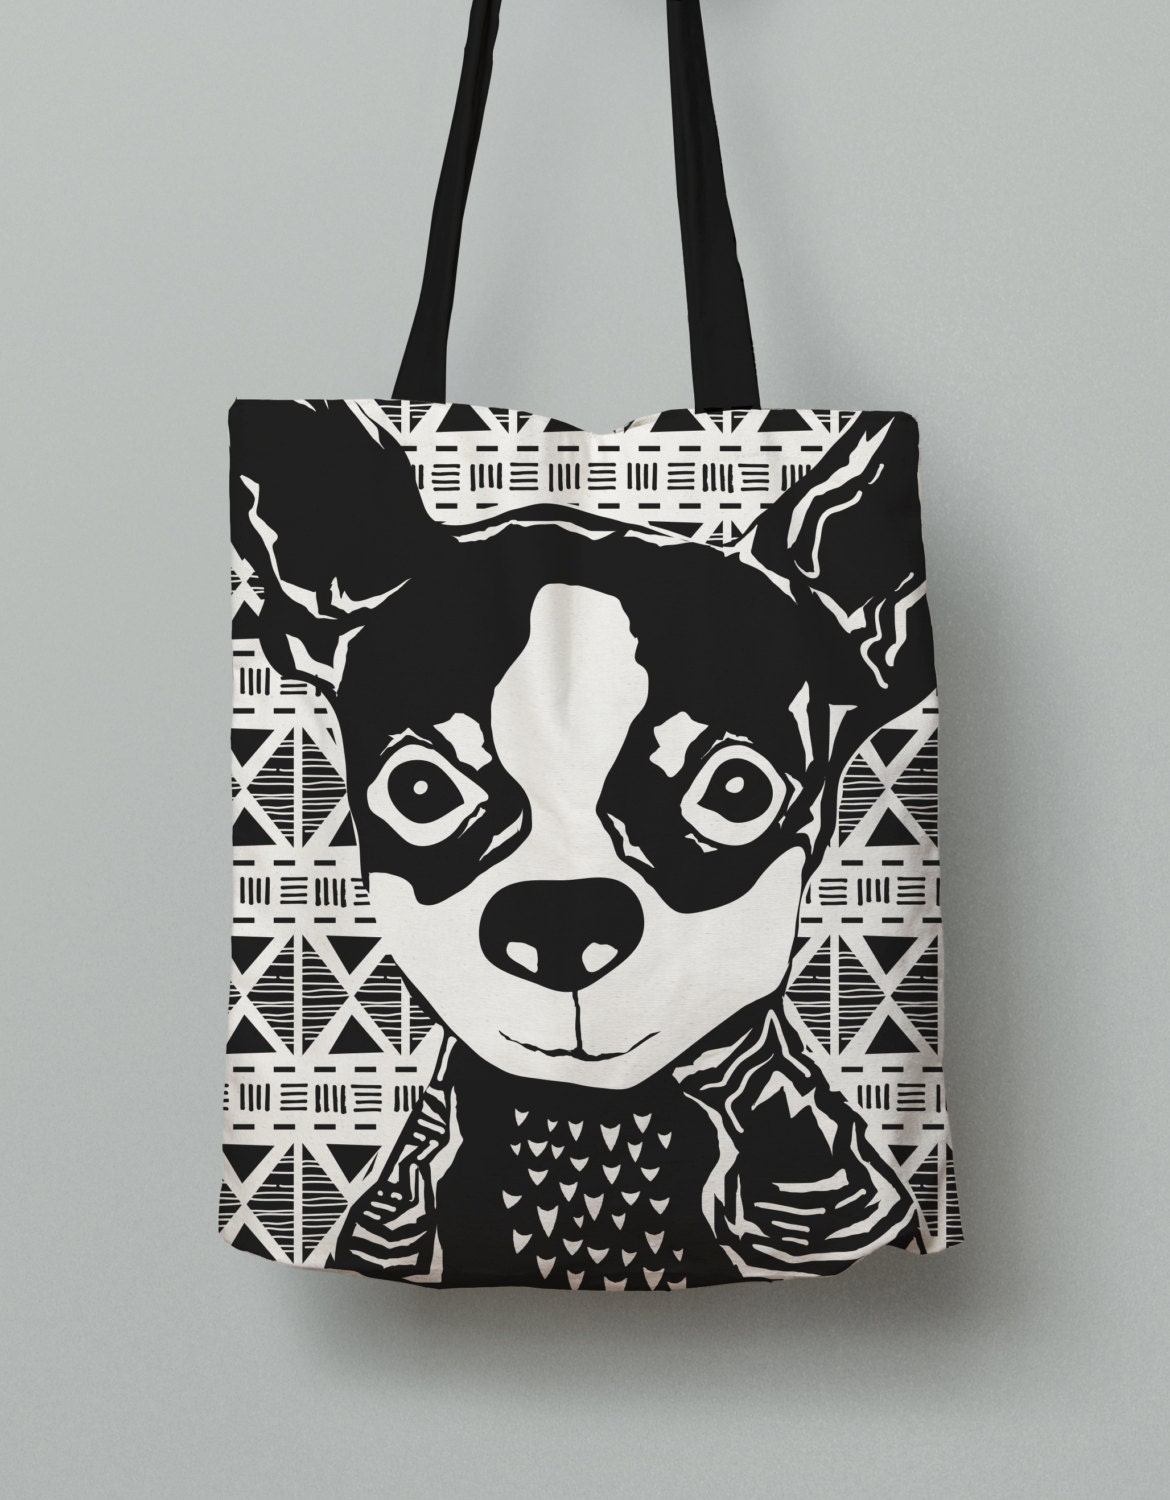 Chihuahua Tote Bag Black and White All Over Print Tote Bag | Etsy